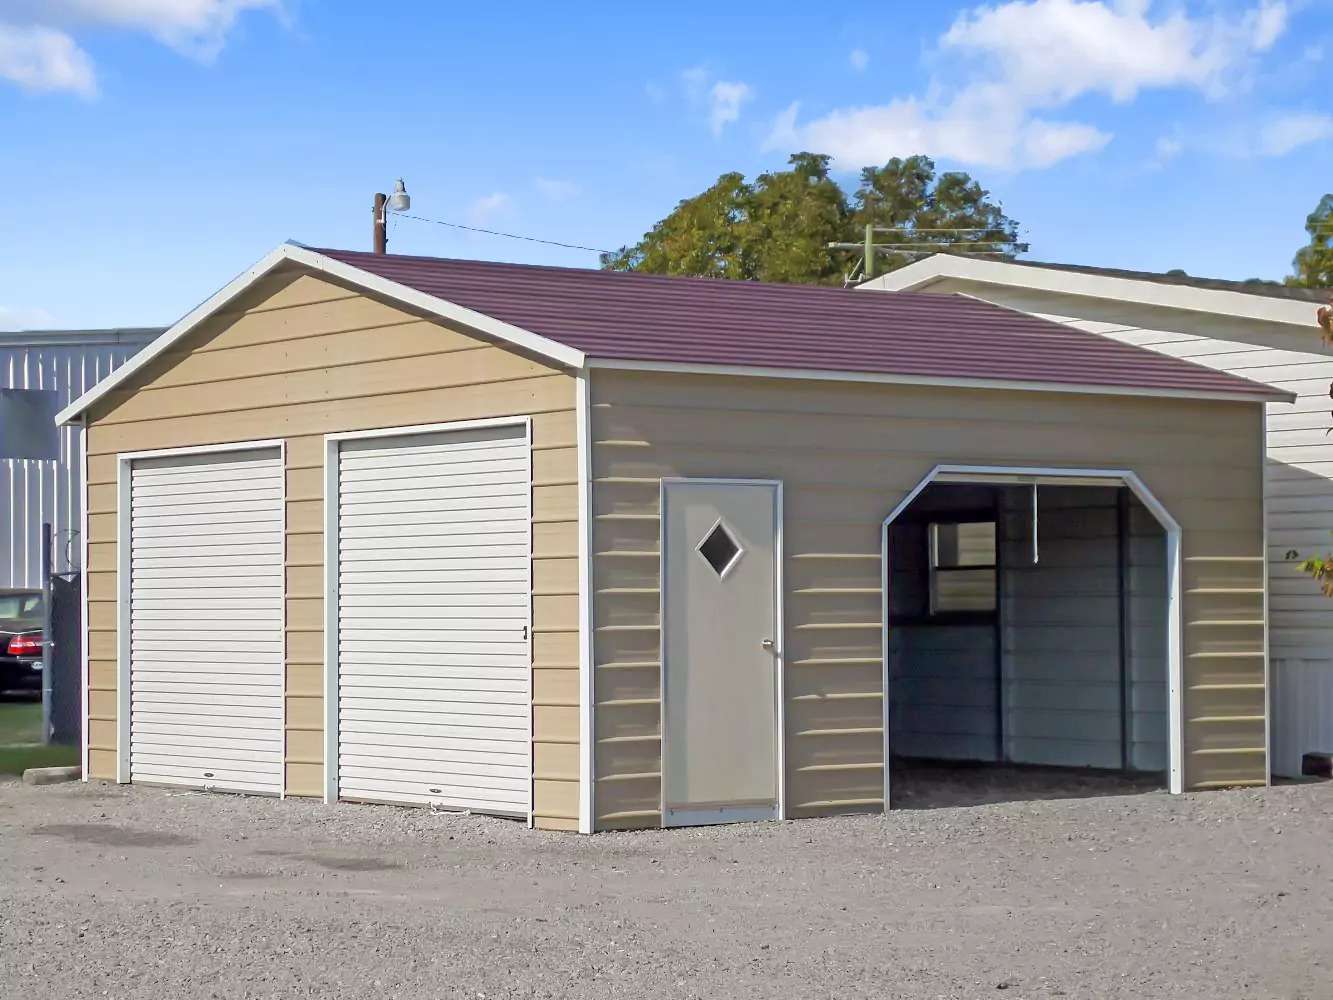 The Definitive Guide To Selecting The Ideal Metal Garage For Your Needs